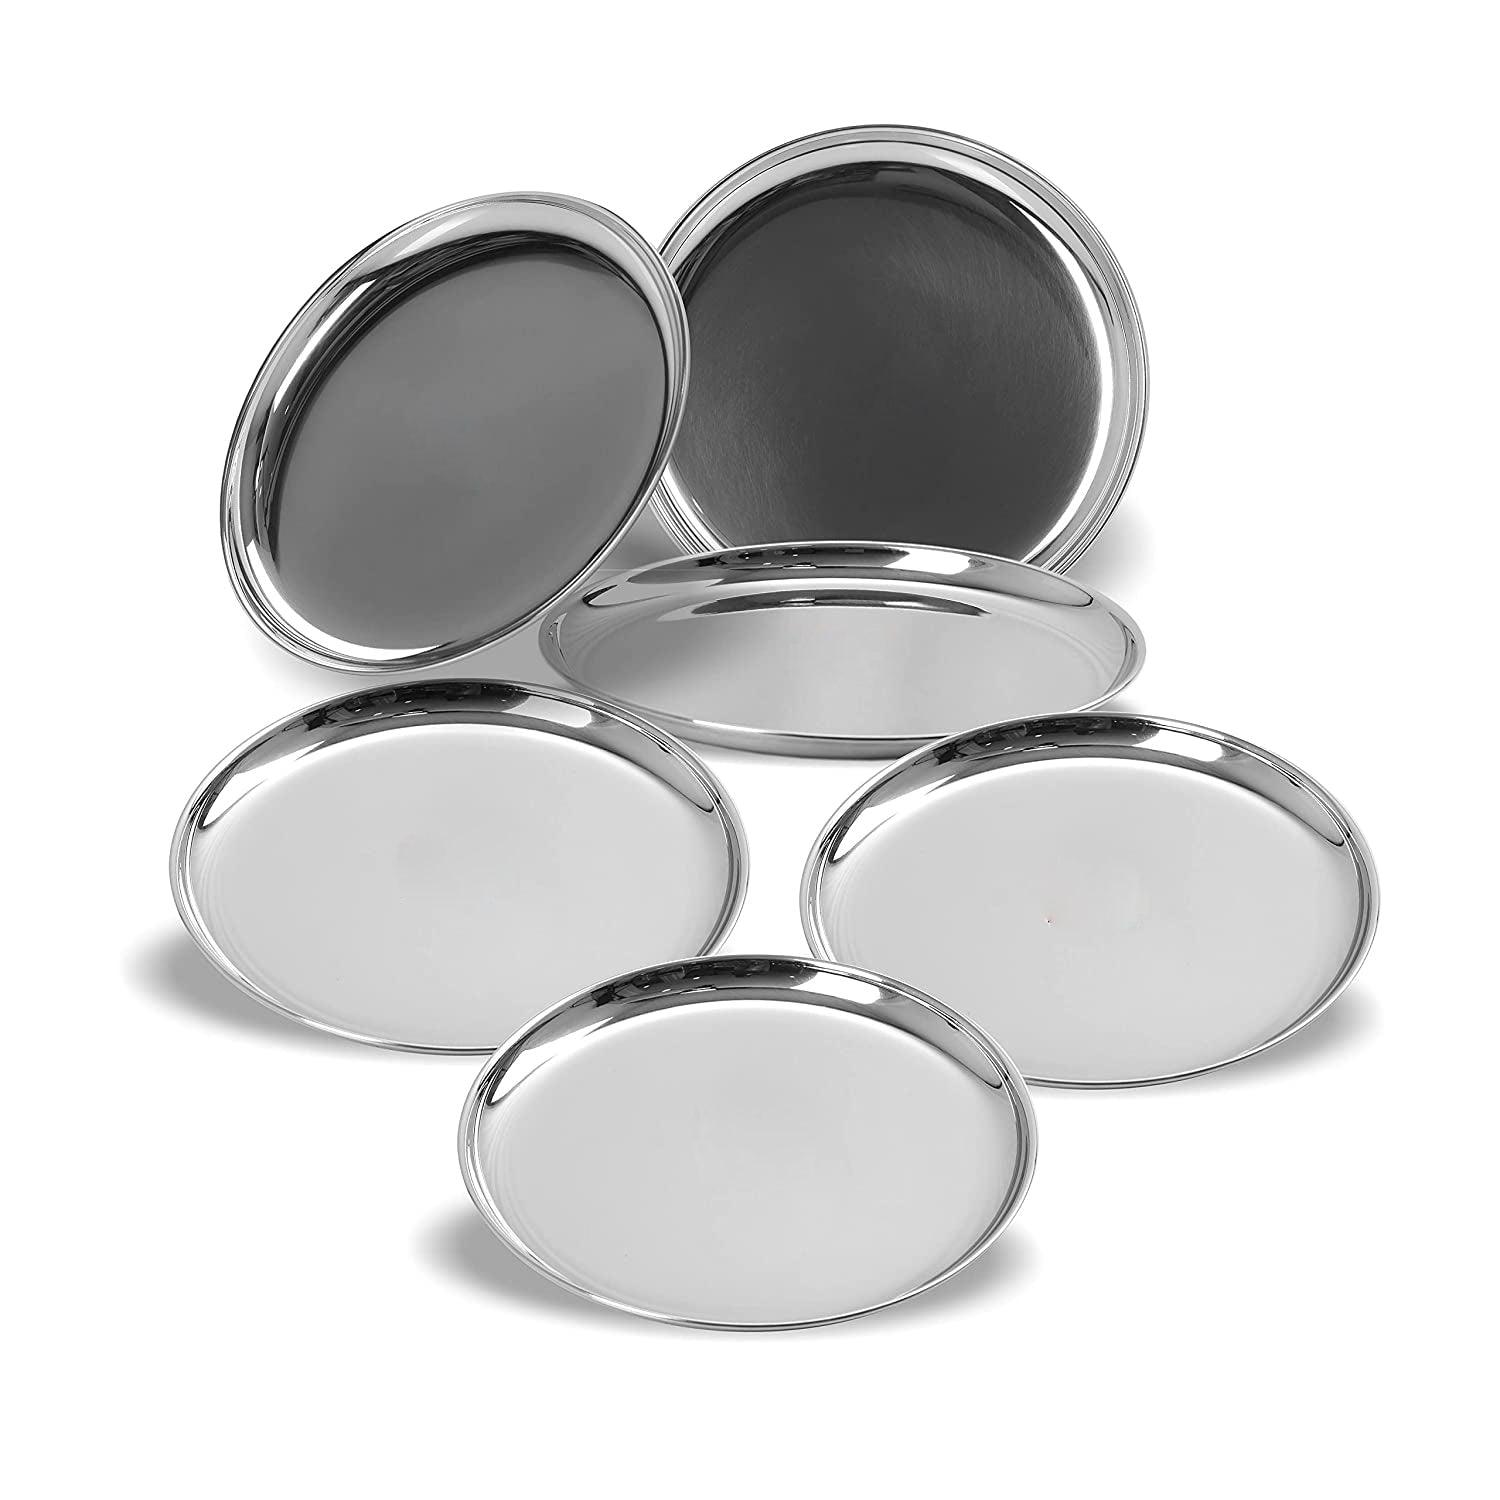 Stainless Steel Heavy Gauge Shallow Salad Plates with High Polish Mirror Finish (18.5 Cm, Silver) - Walgrow.com